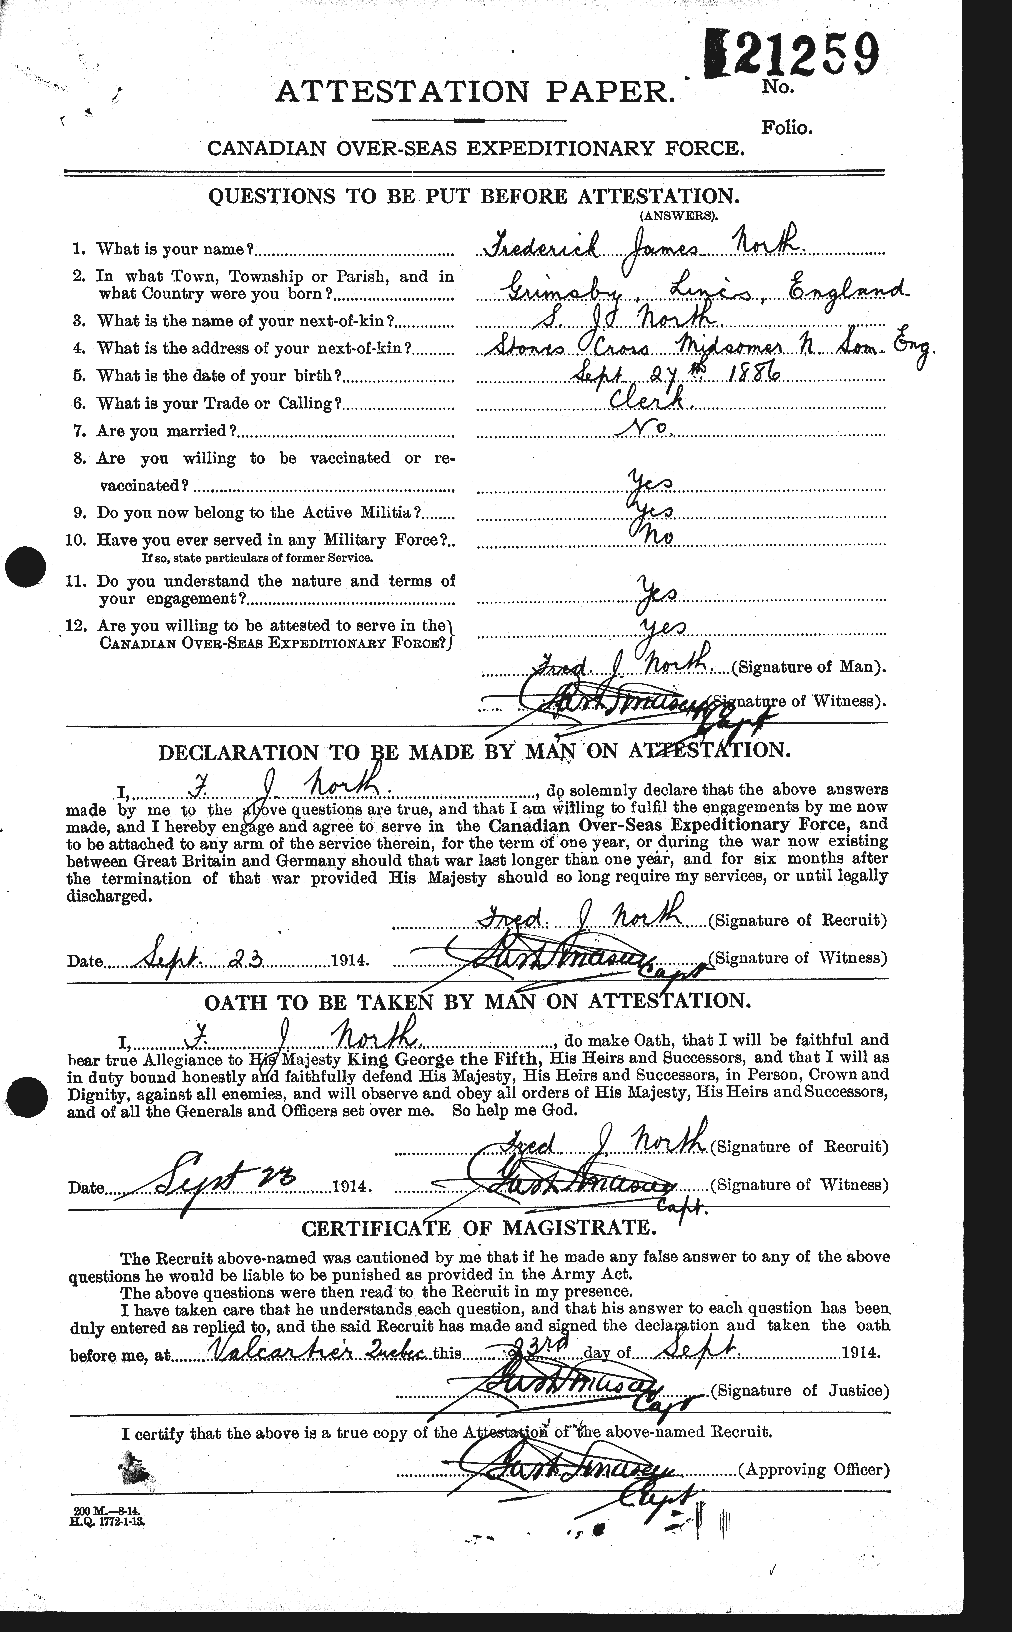 Personnel Records of the First World War - CEF 549873a